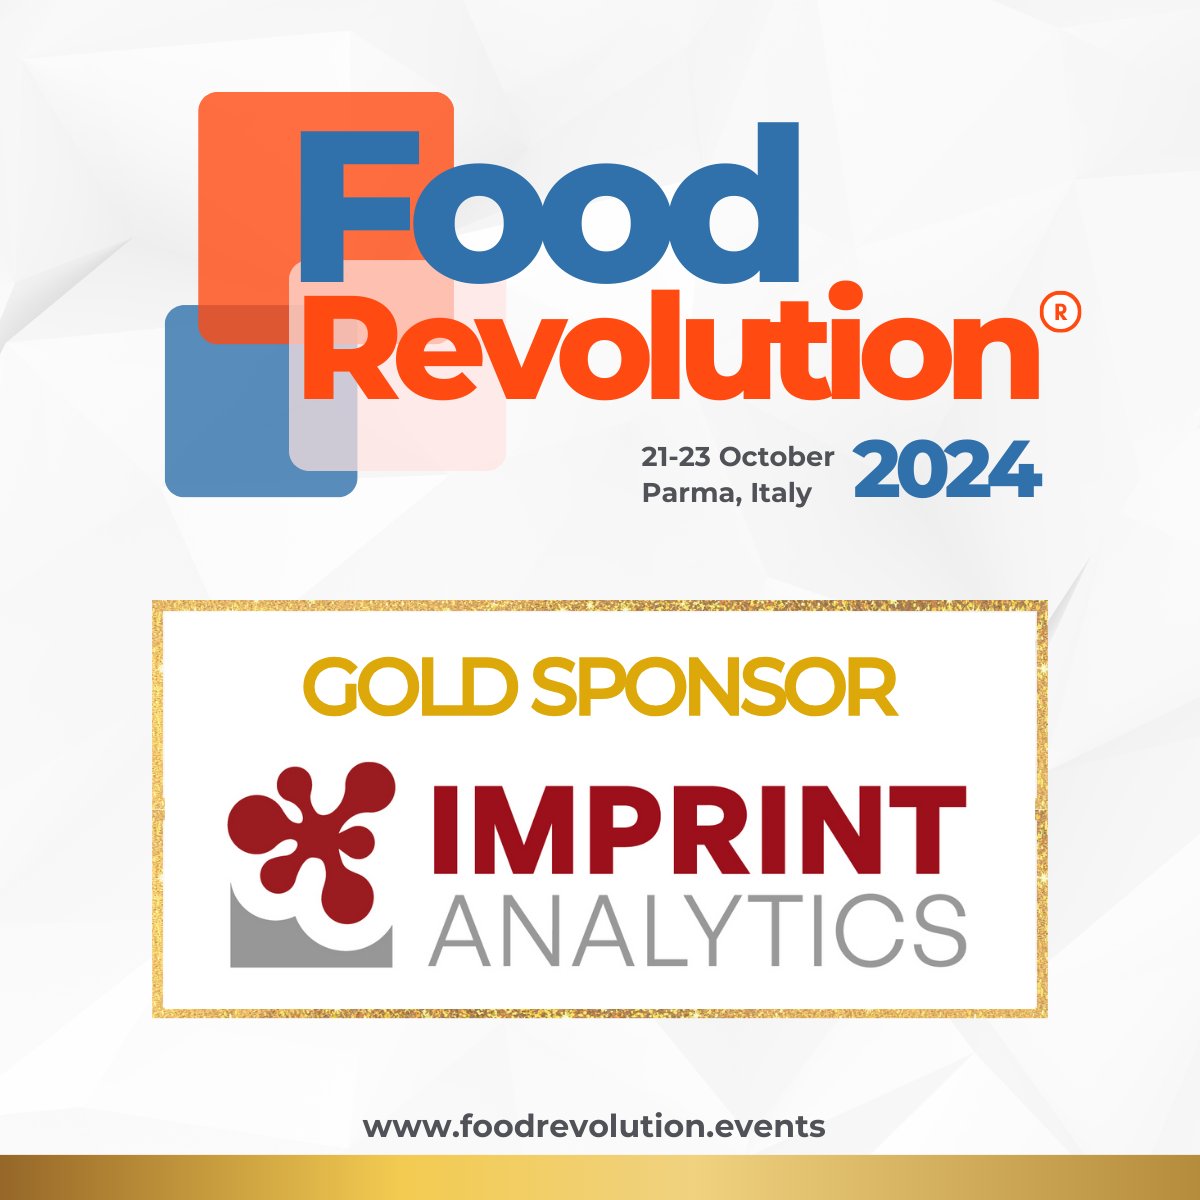 We are thrilled to introduce Imprint Analytics as a Gold Sponsor for the upcoming FoodRevolution 2024 event! 

Stay tuned for further updates about #FoodRevolution2024! Don't miss out on this incredible opportunity to network, learn, and shape the future of the food ecosystem!